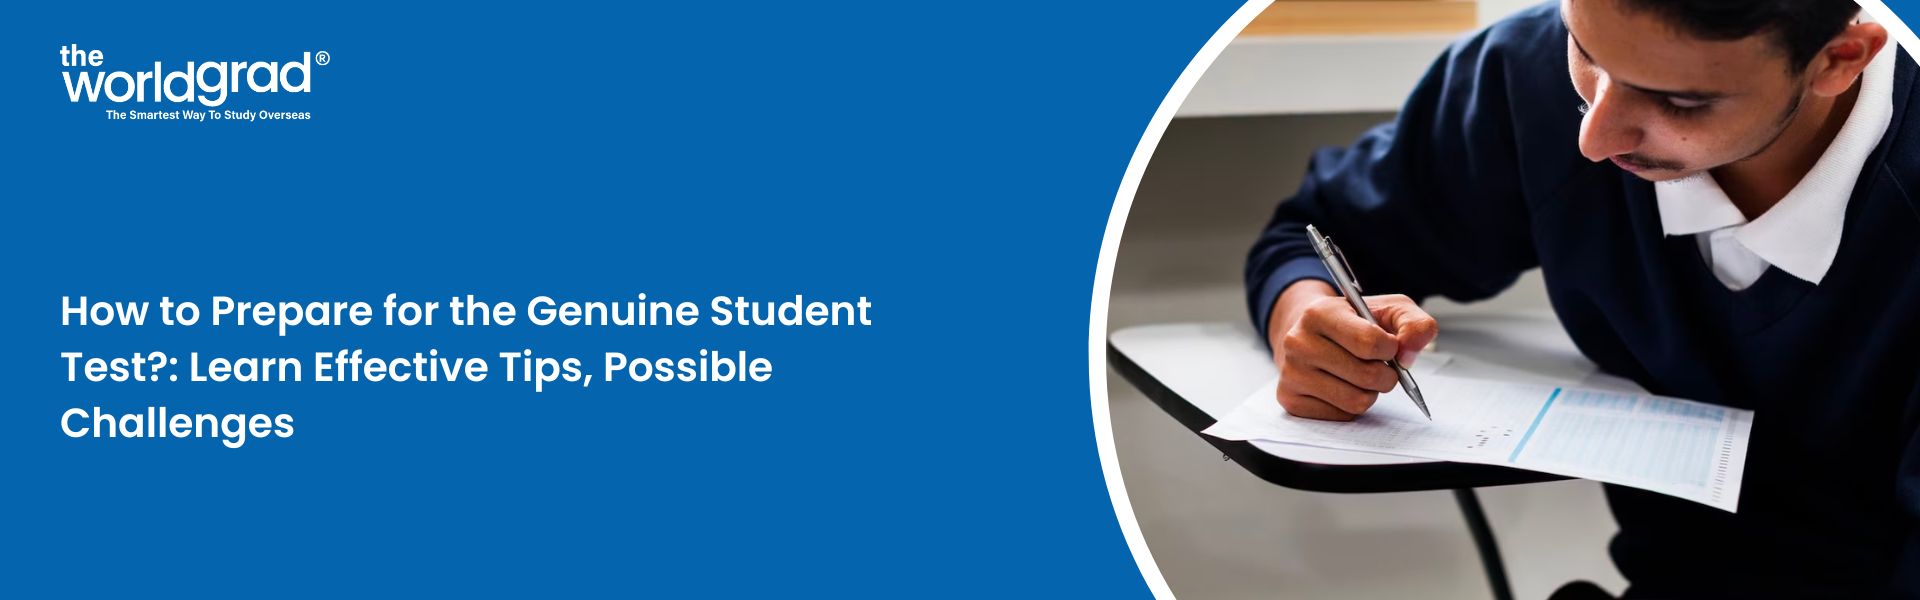 How to Prepare for the Genuine Student Test?: Learn Effective Tips, Possible Challenges